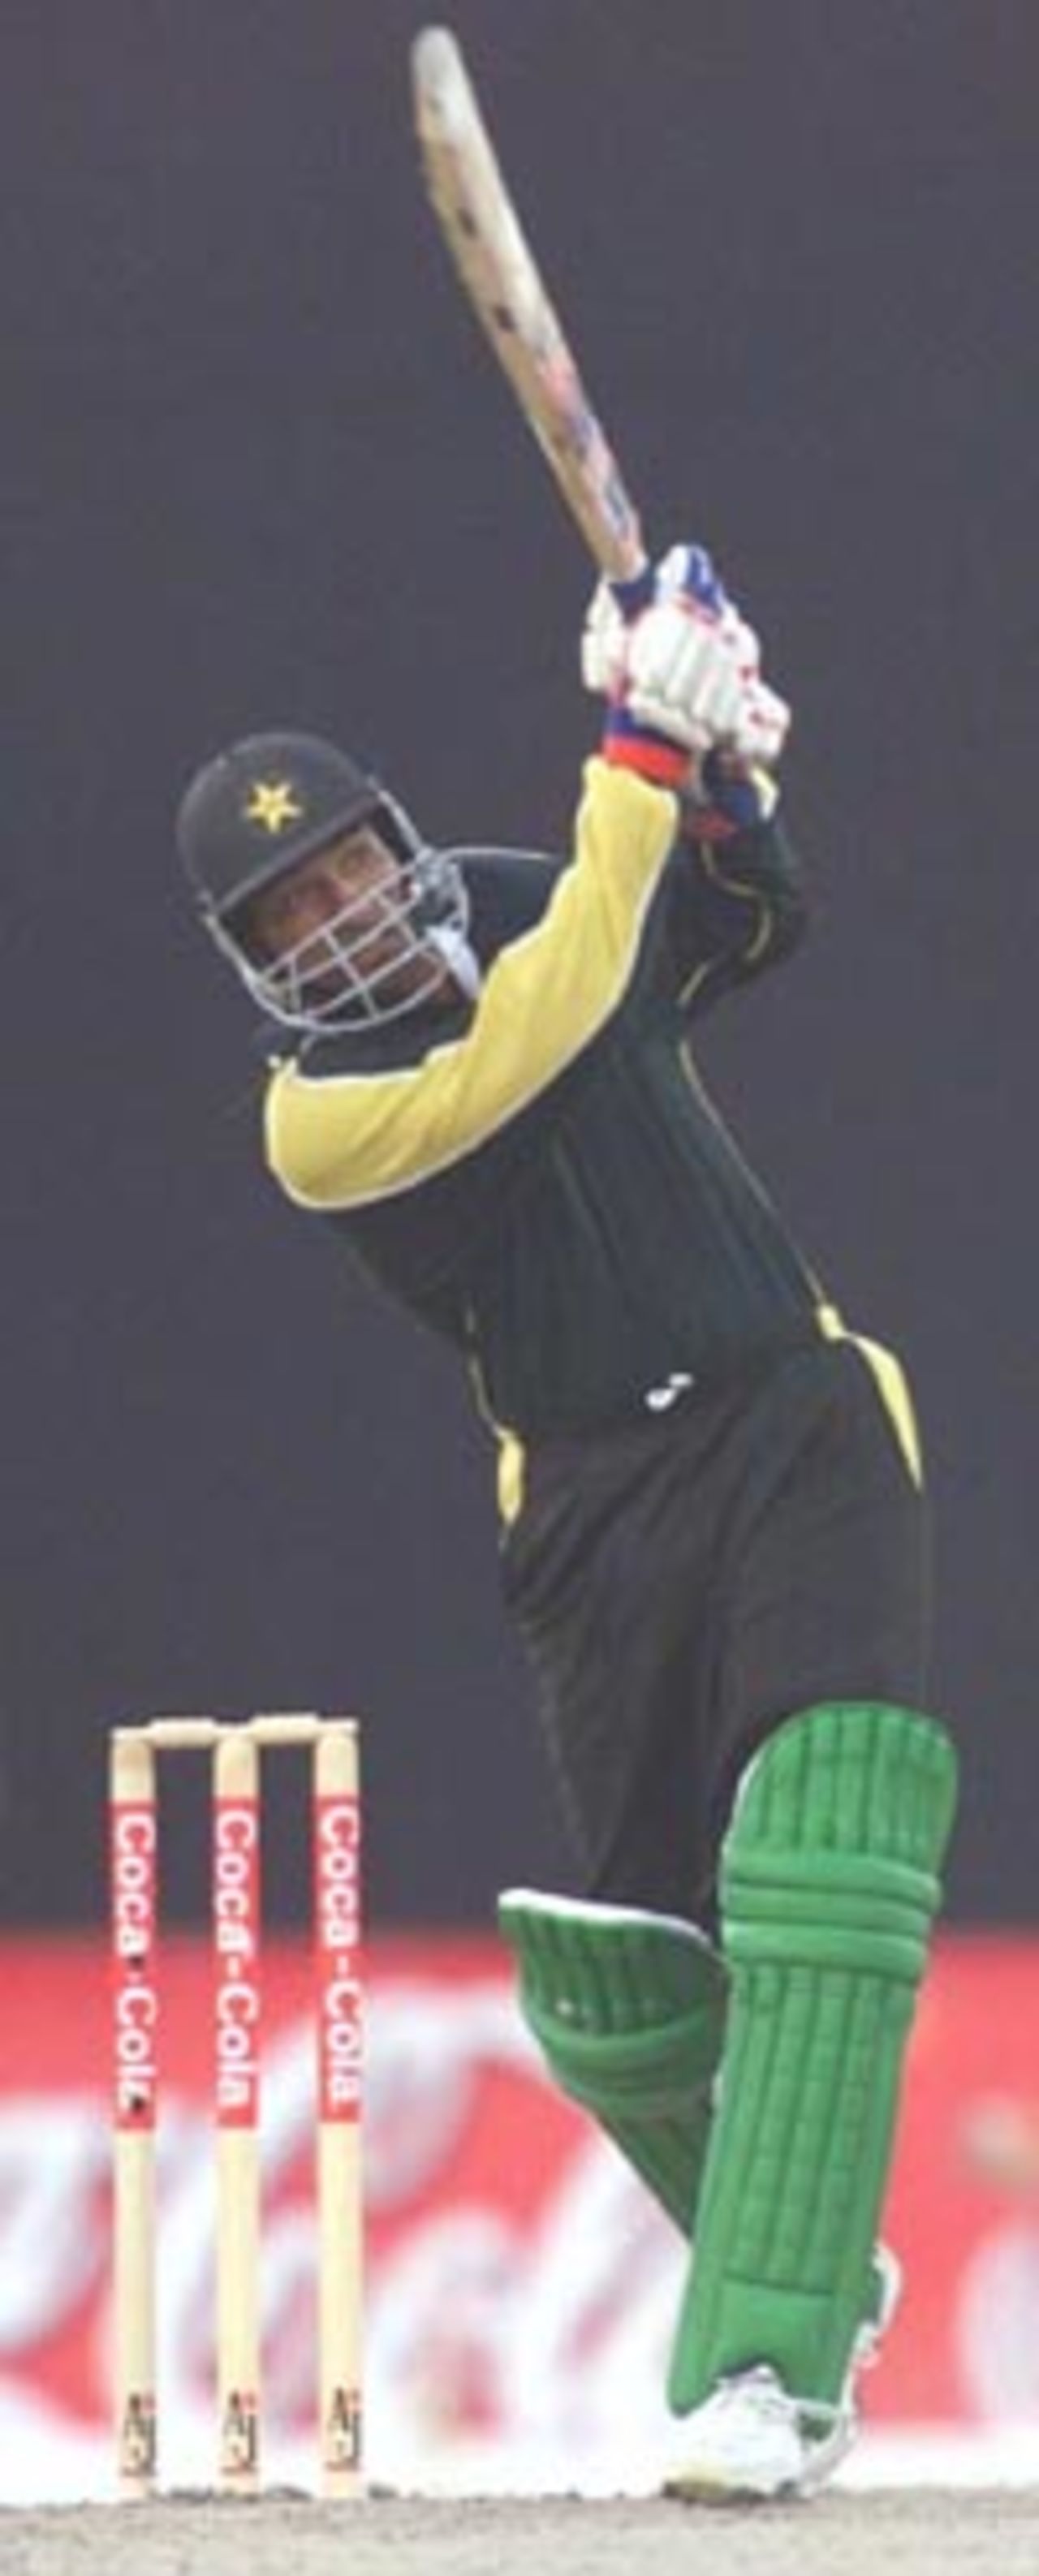 Yousuf Youhana in action, Pakistan v South Africa, Coca-Cola Cup 1999/00, Sharjah C.A. Stadium, 28 March 2000.